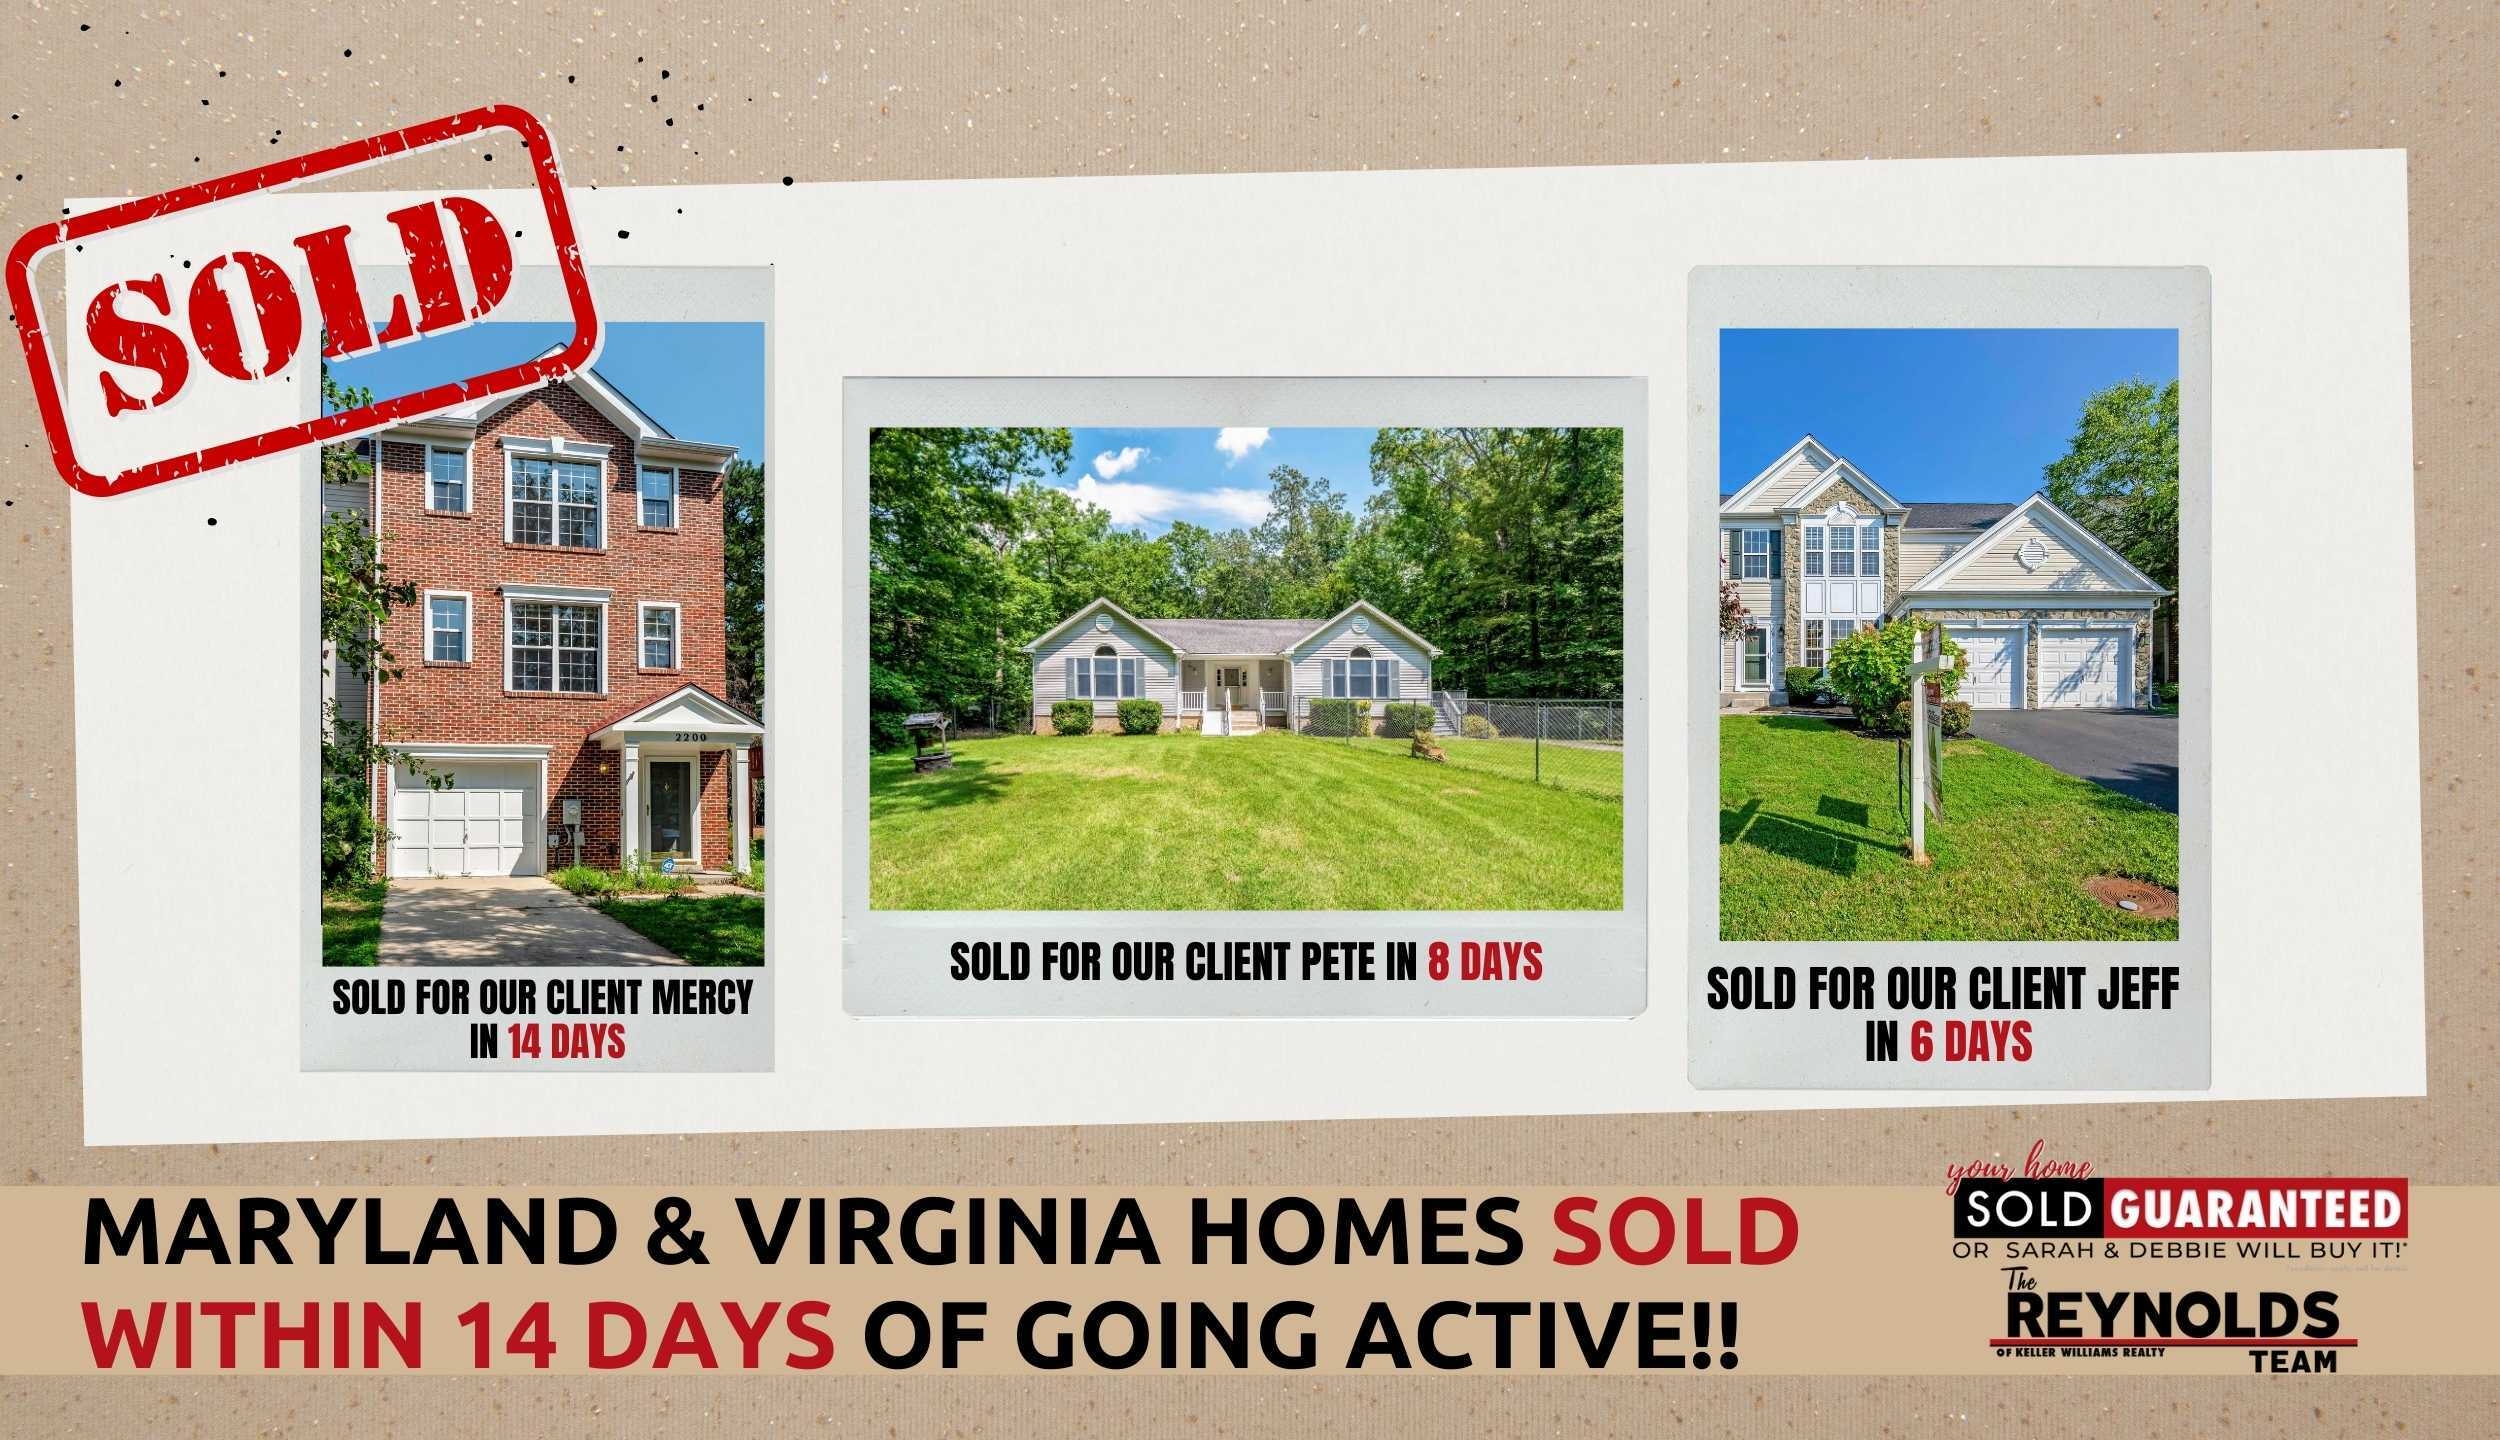 Maryland & Virginia Homes SOLD within 14 days of going active!!